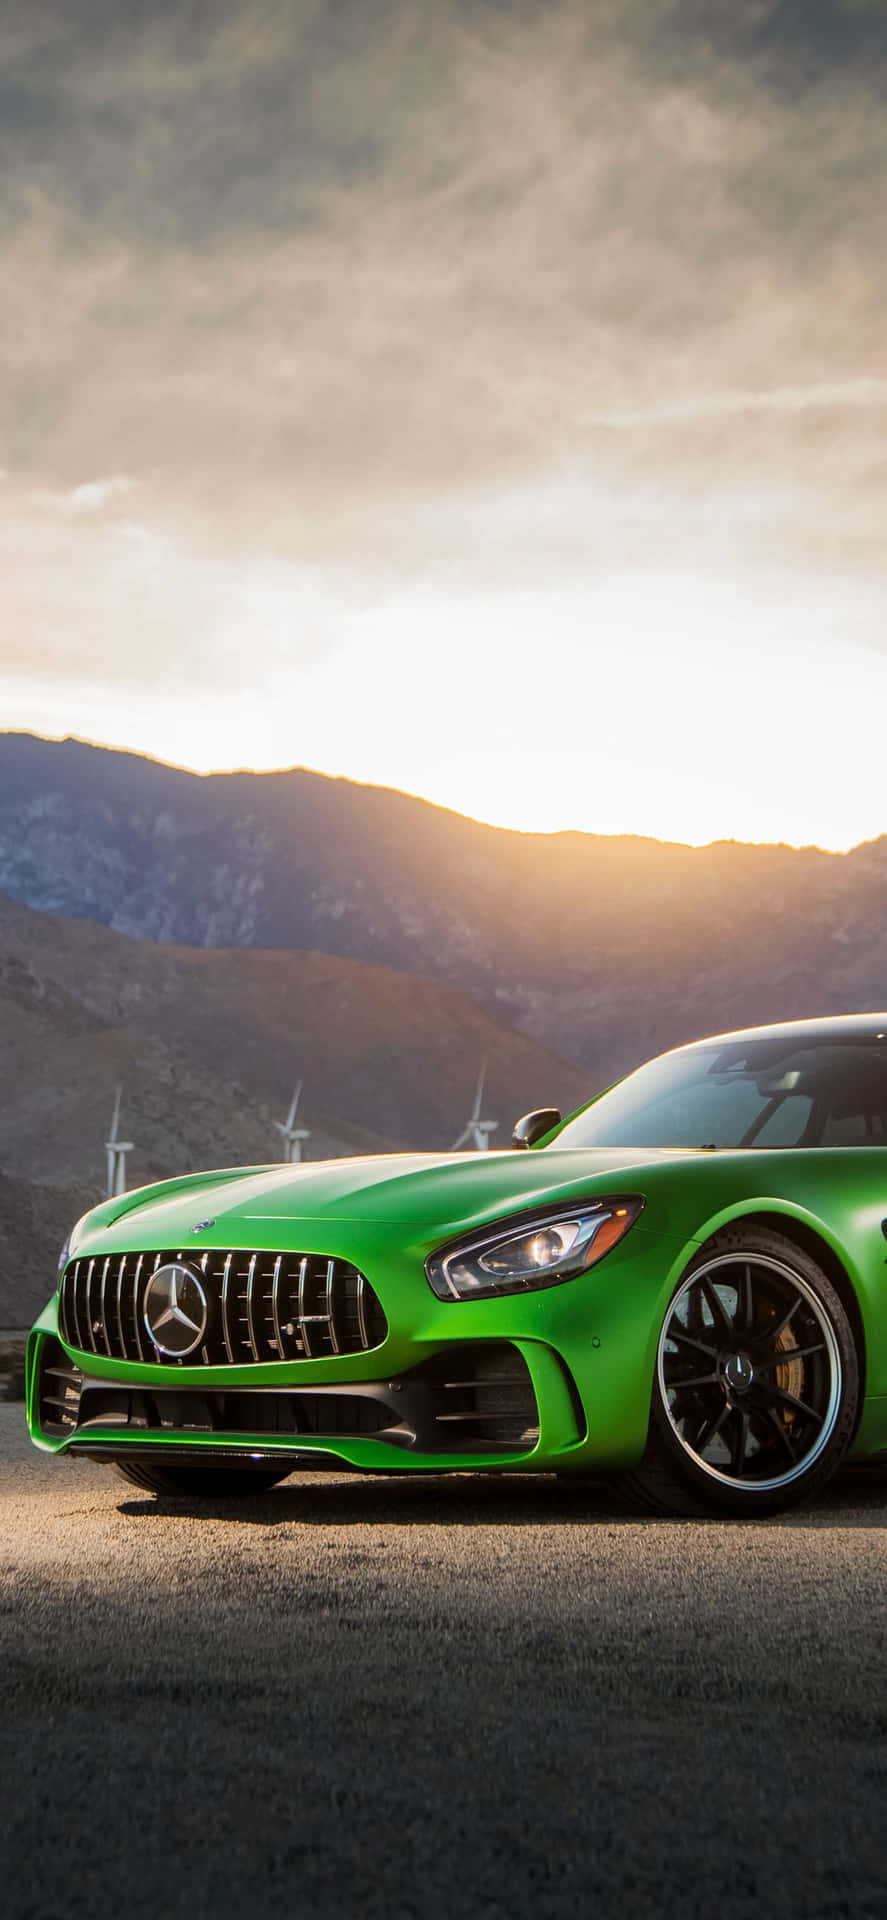 Android AMG GT-R Grøn Solopgang Baggrund